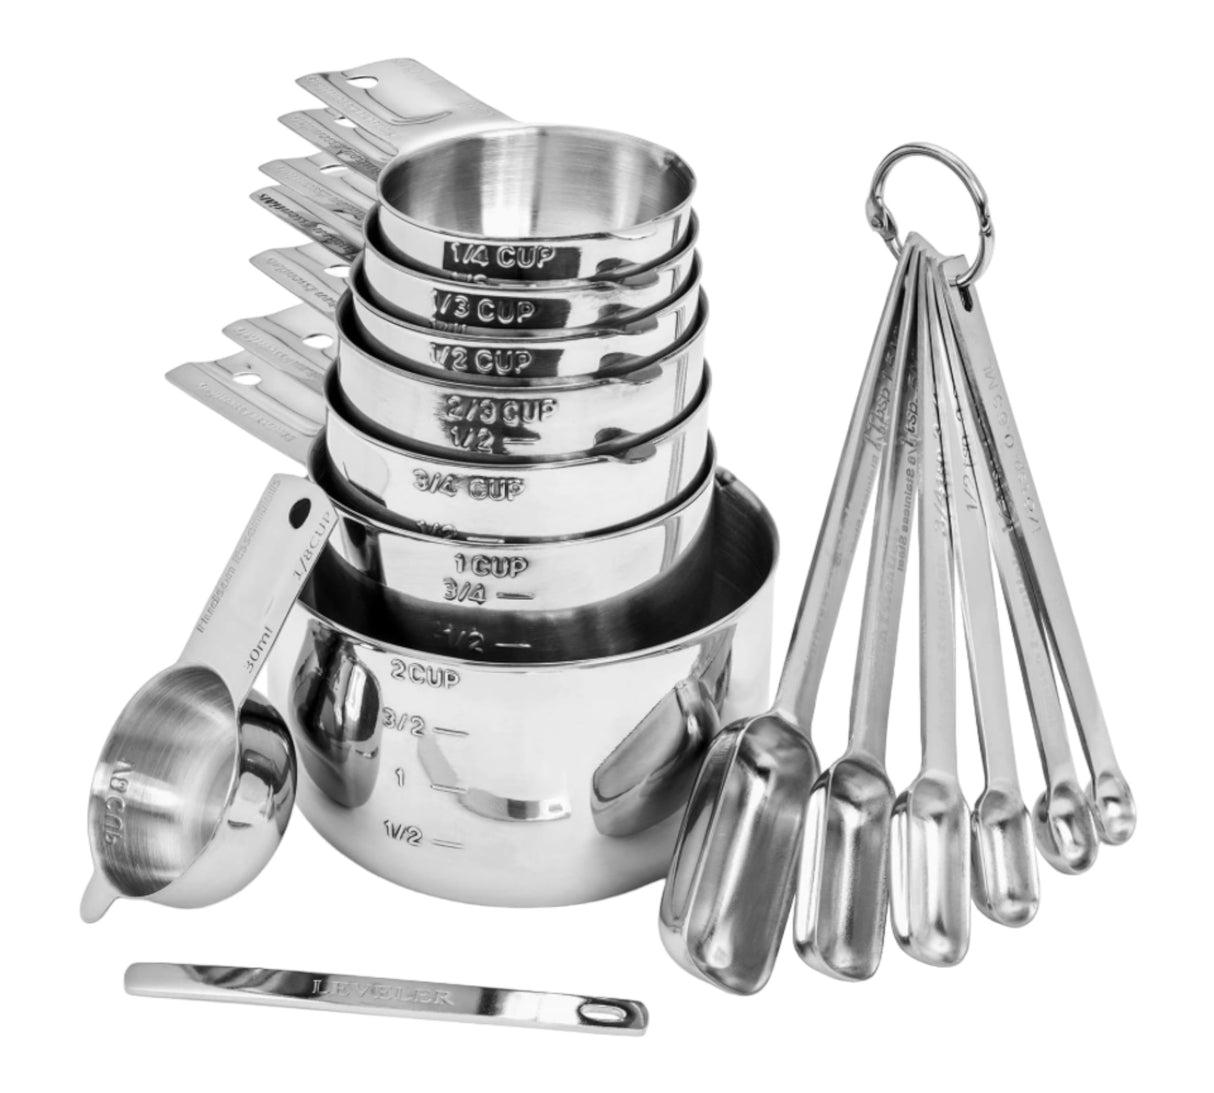 Personalized Measuring Cups and Spoons Premium Set - Stainless Steel